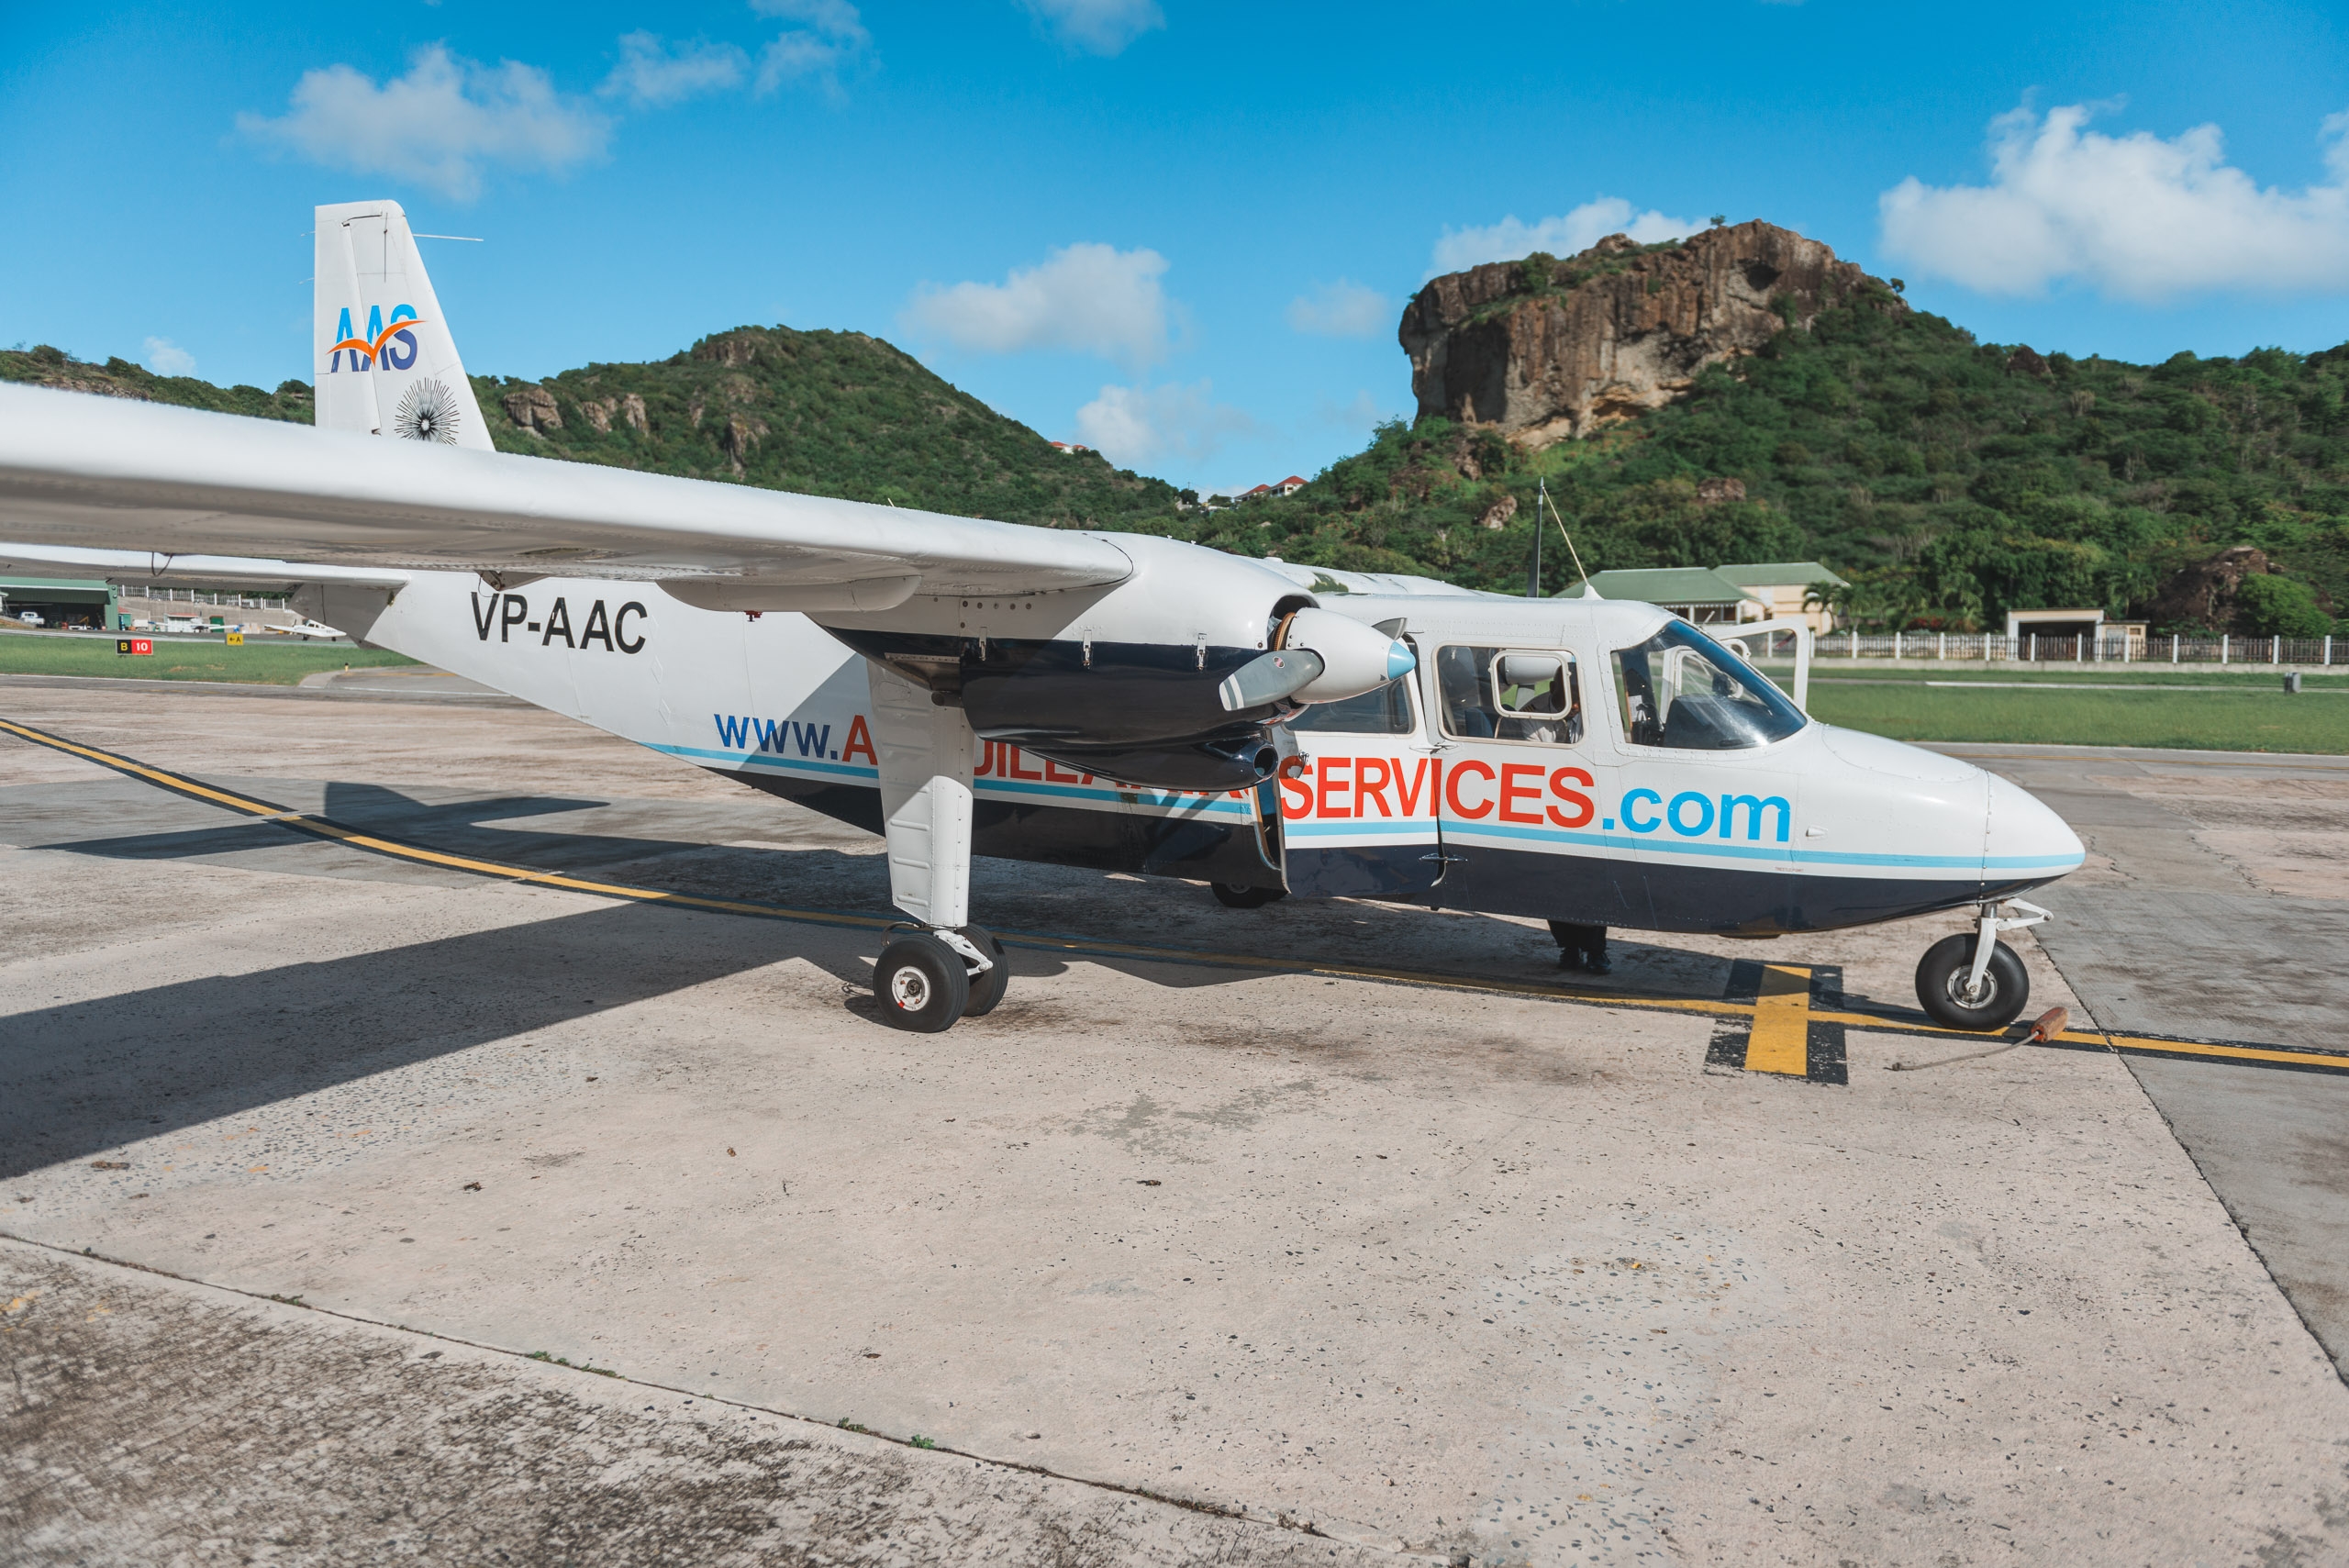 Arriving in St. Barth with Anguilla Air Services